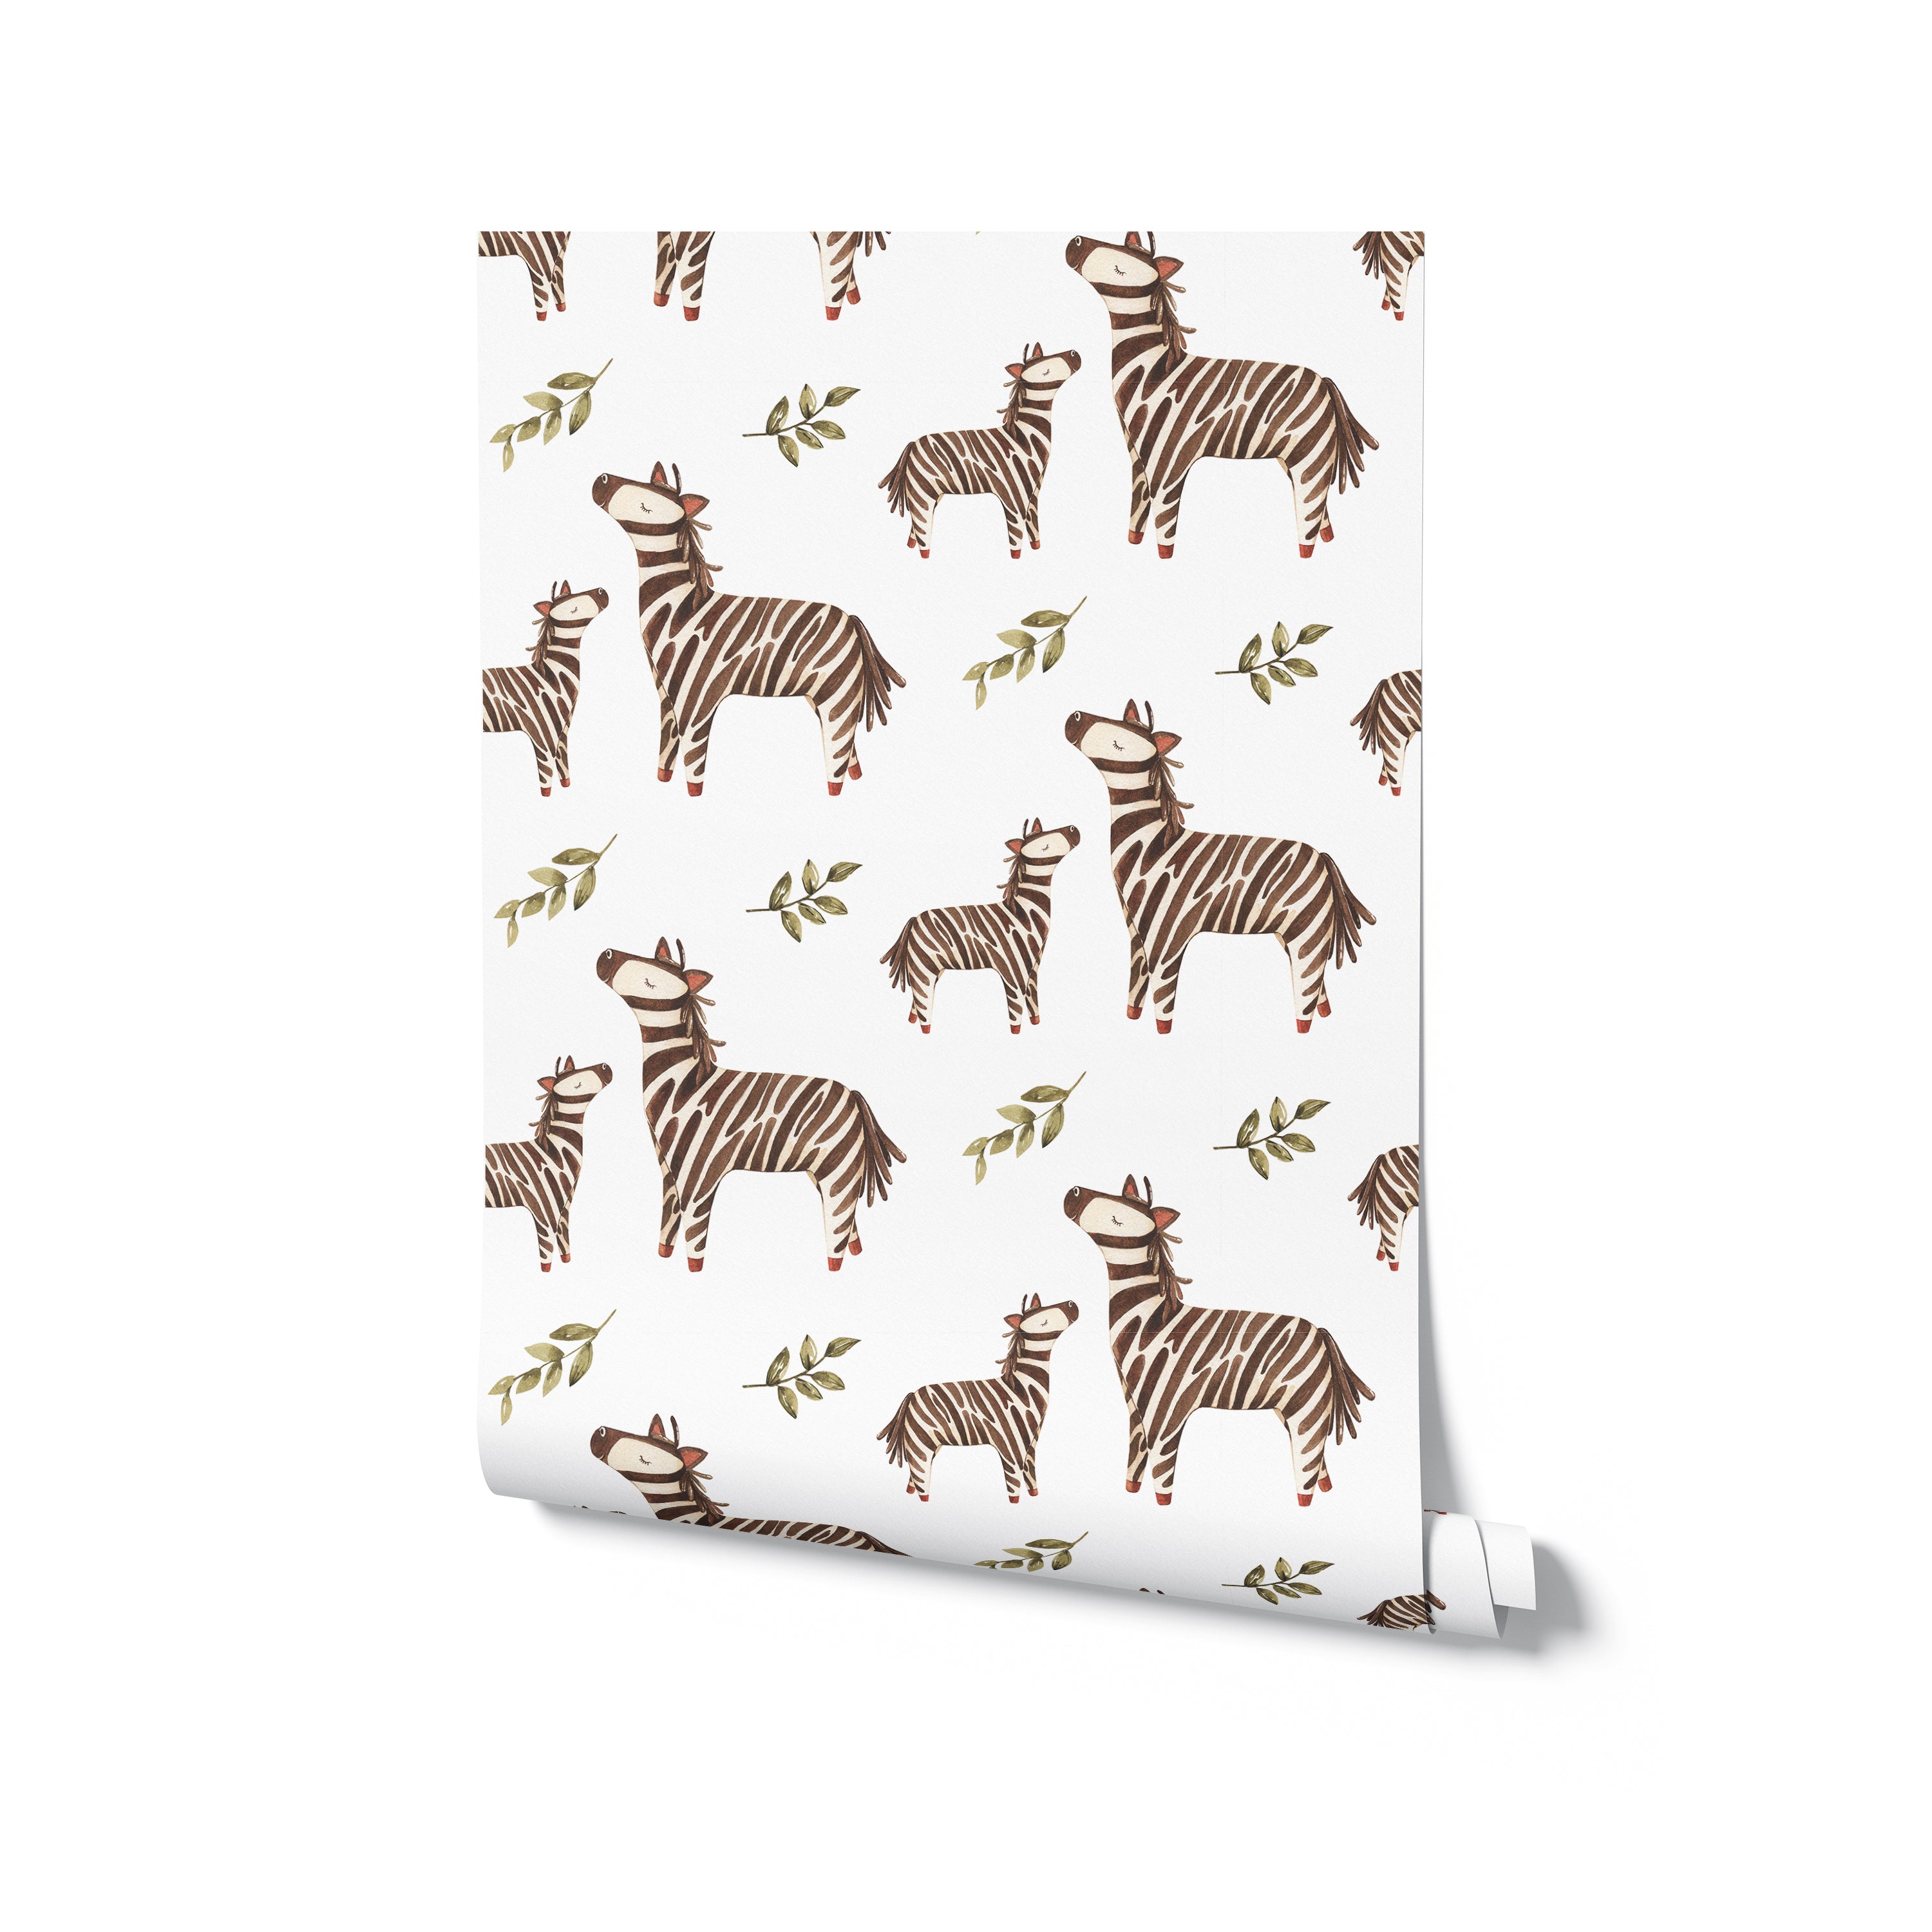 Roll of watercolor zebra wallpaper with detailed zebras and green leaves design